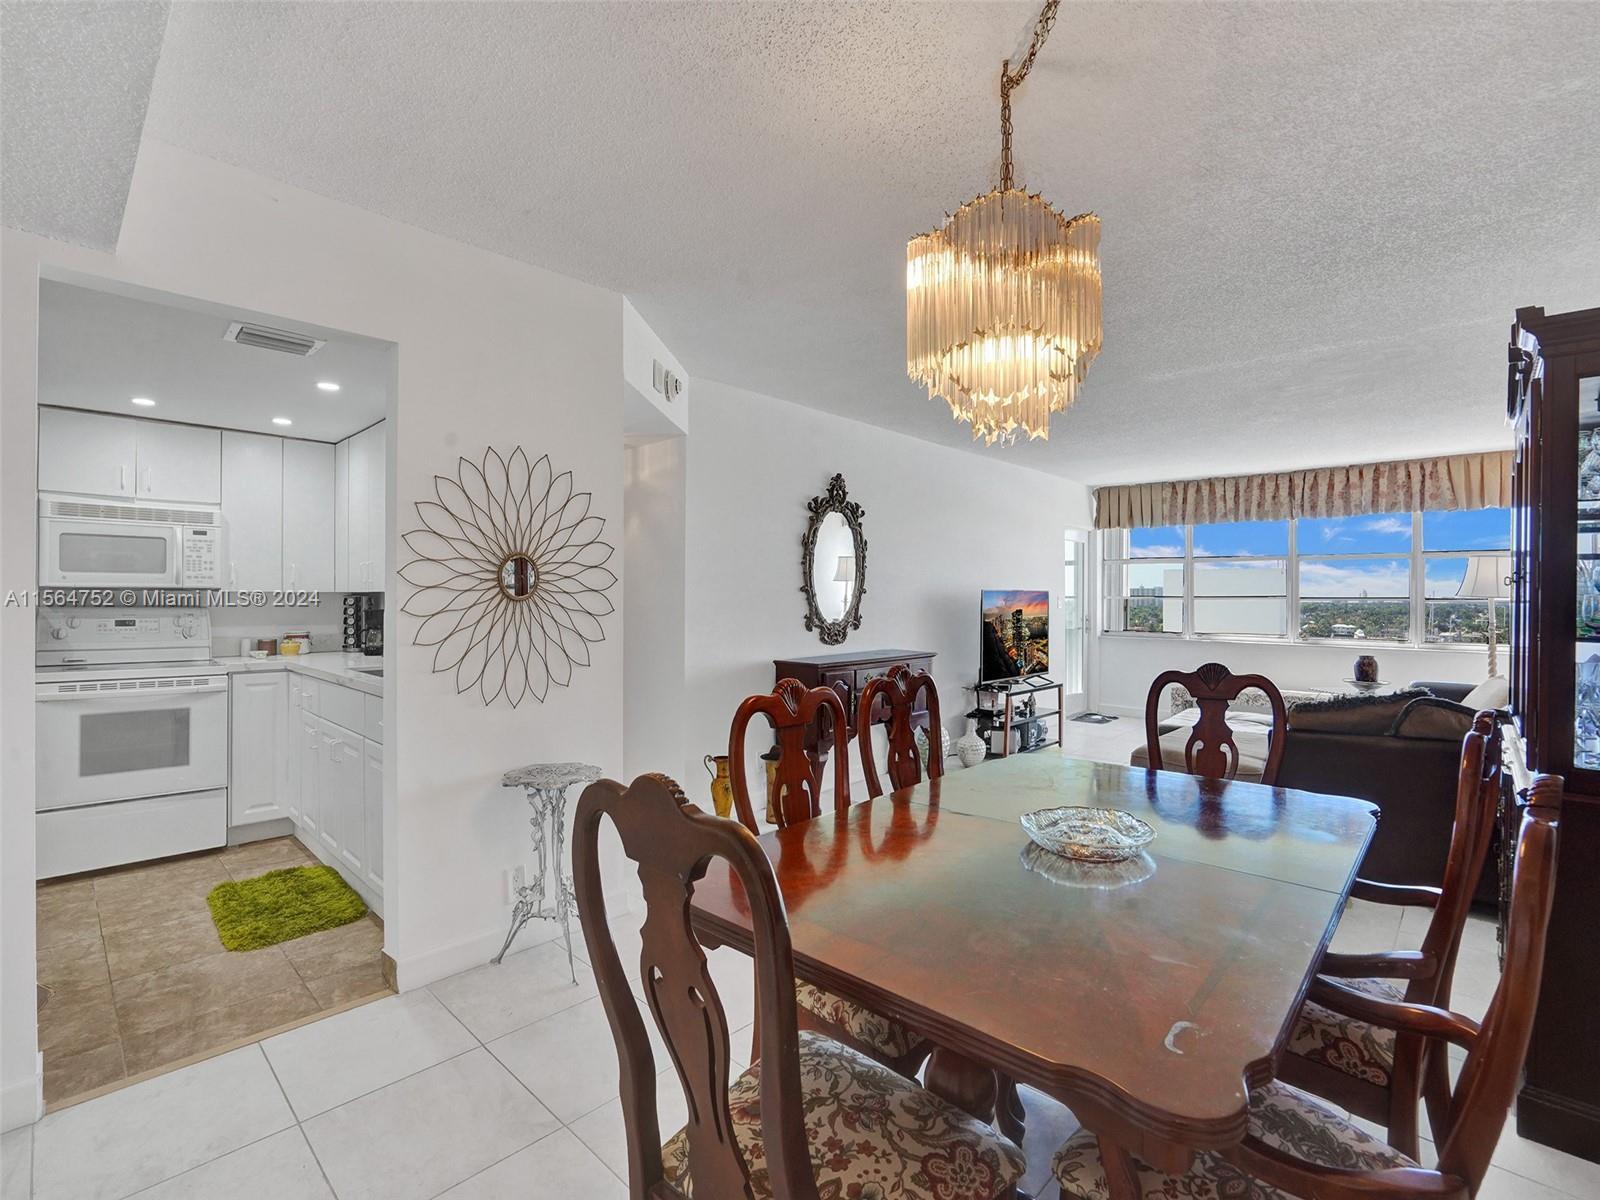 Beautiful 2 bedroom 2 bathroom penthouse condo in the heart of Ft. Lauderdale. This magnificent resi